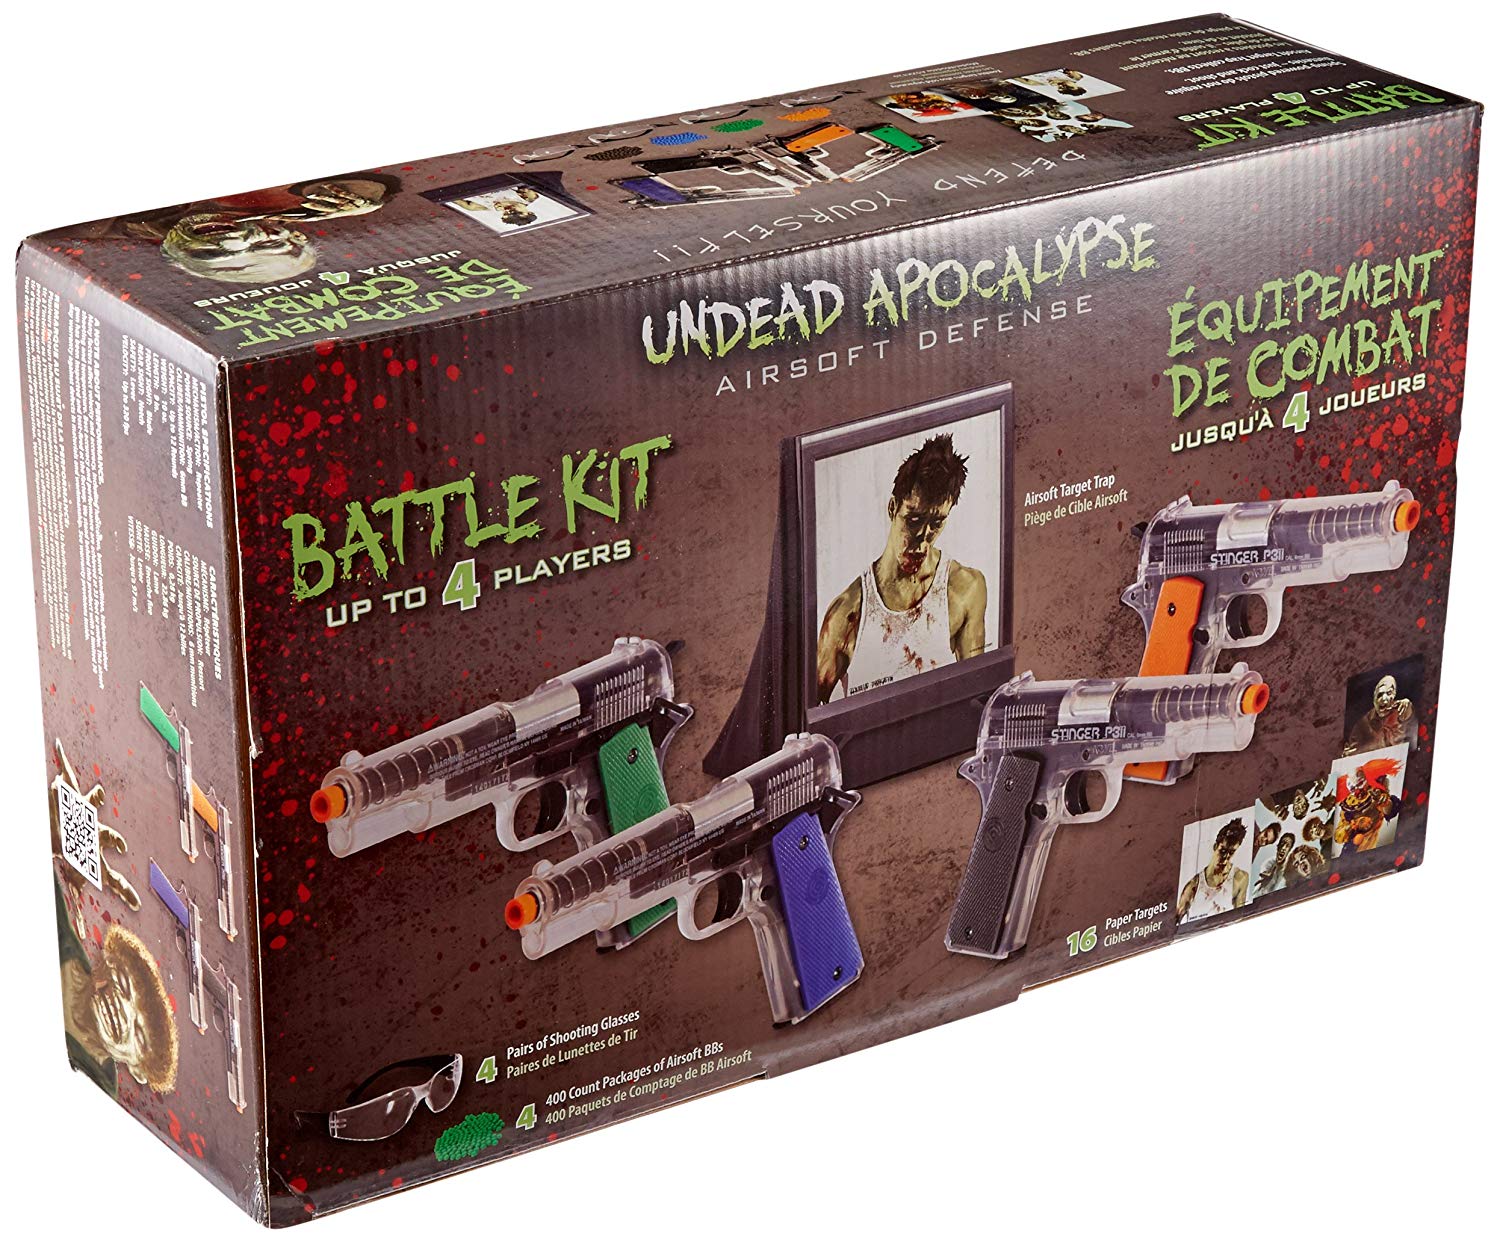 Undead Apocalypse Zombie Airsoft Gun Fun Kit – Includes 4 pistols and goggles! Just $22.75!